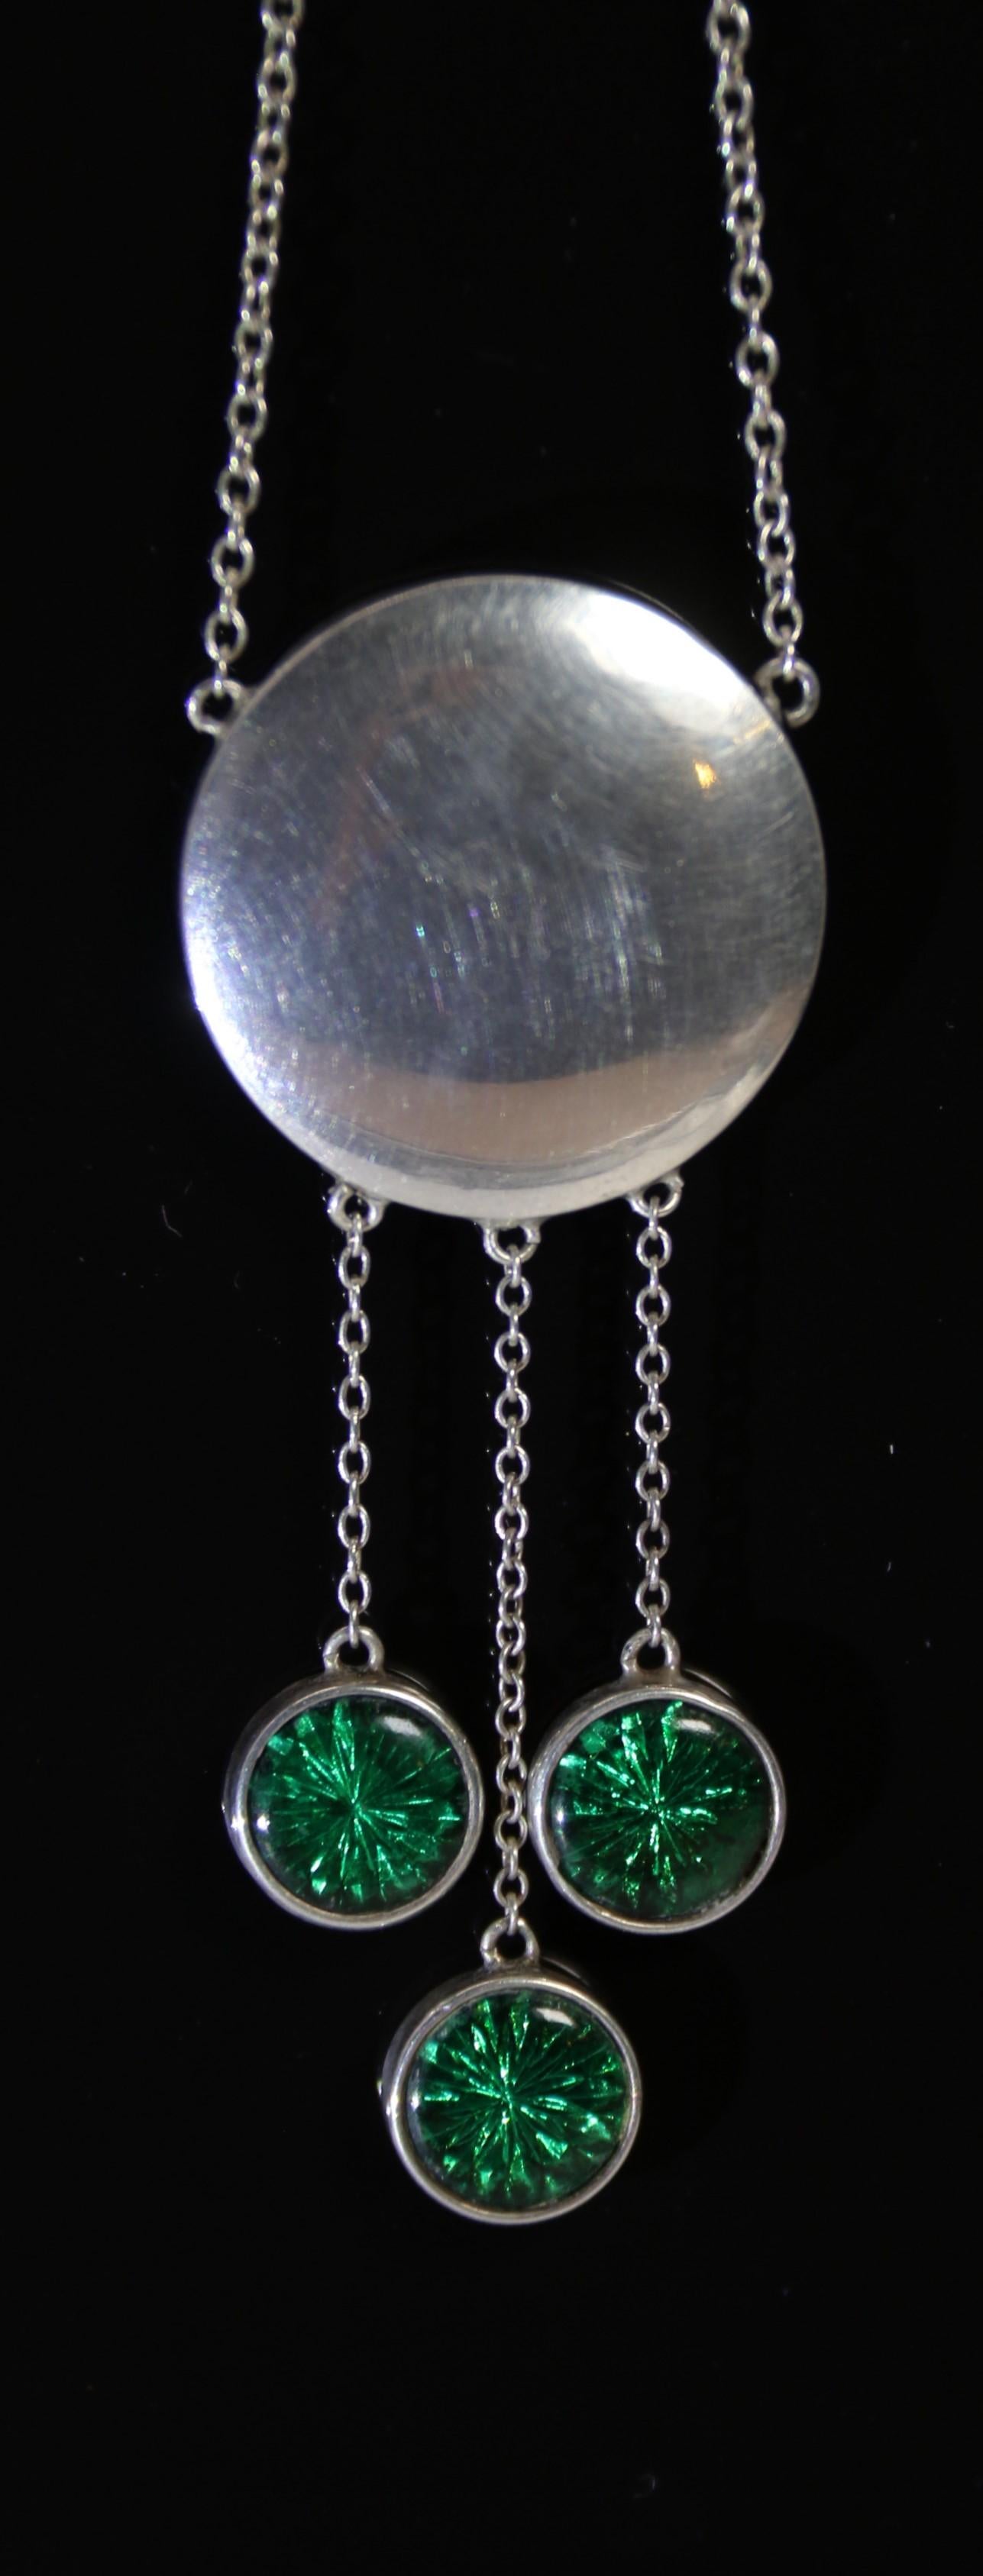 Hand-Crafted An Art Deco silver mother of pearl green enamel necklace/pendant circa 1920